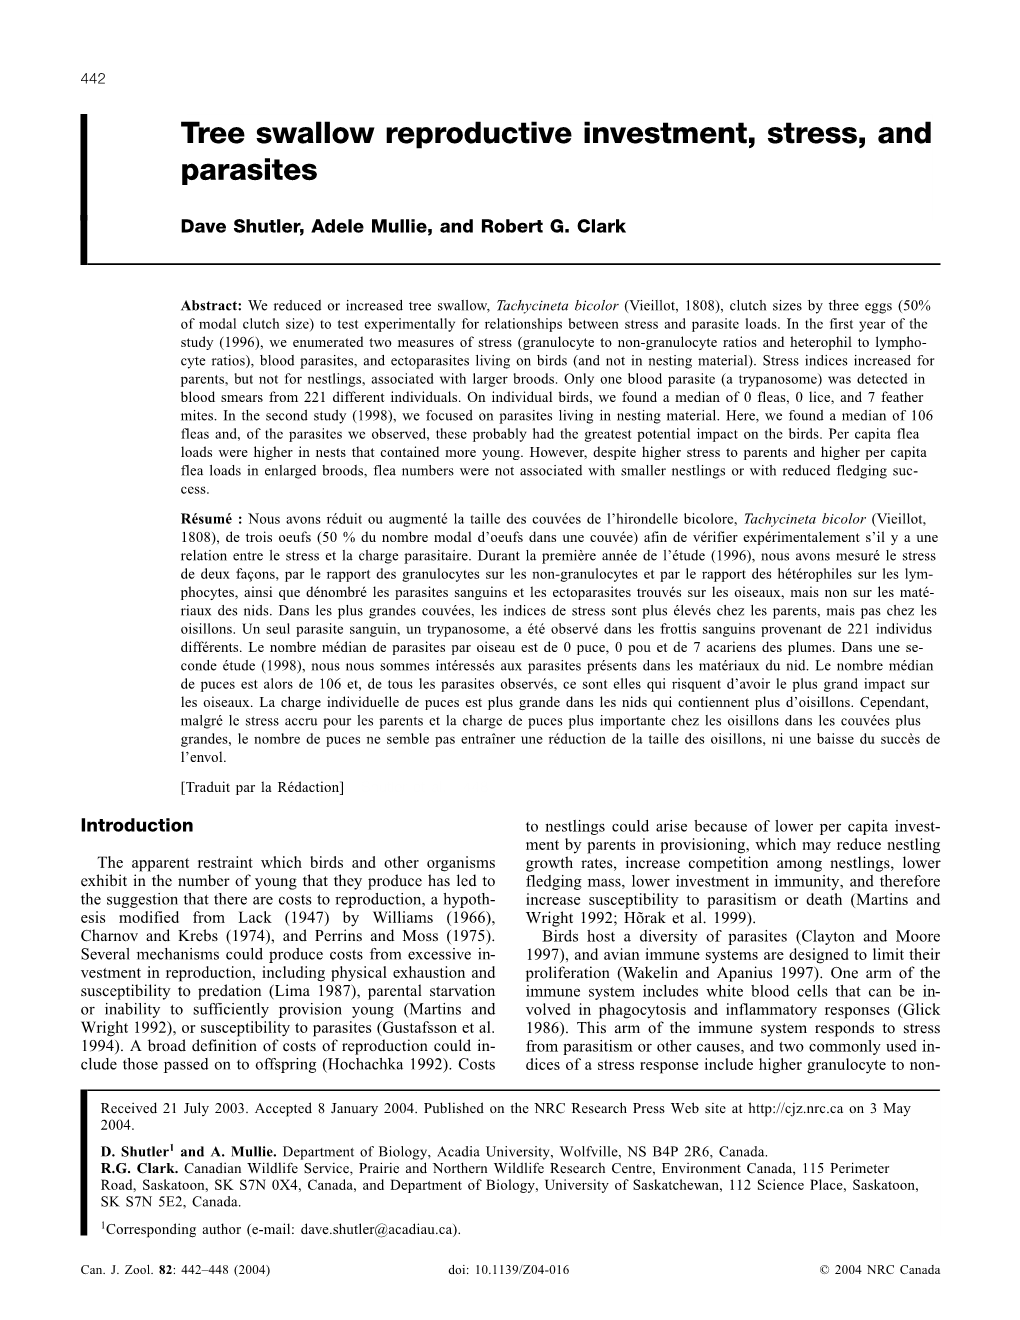 Tree Swallow Reproductive Investment, Stress, and Parasites